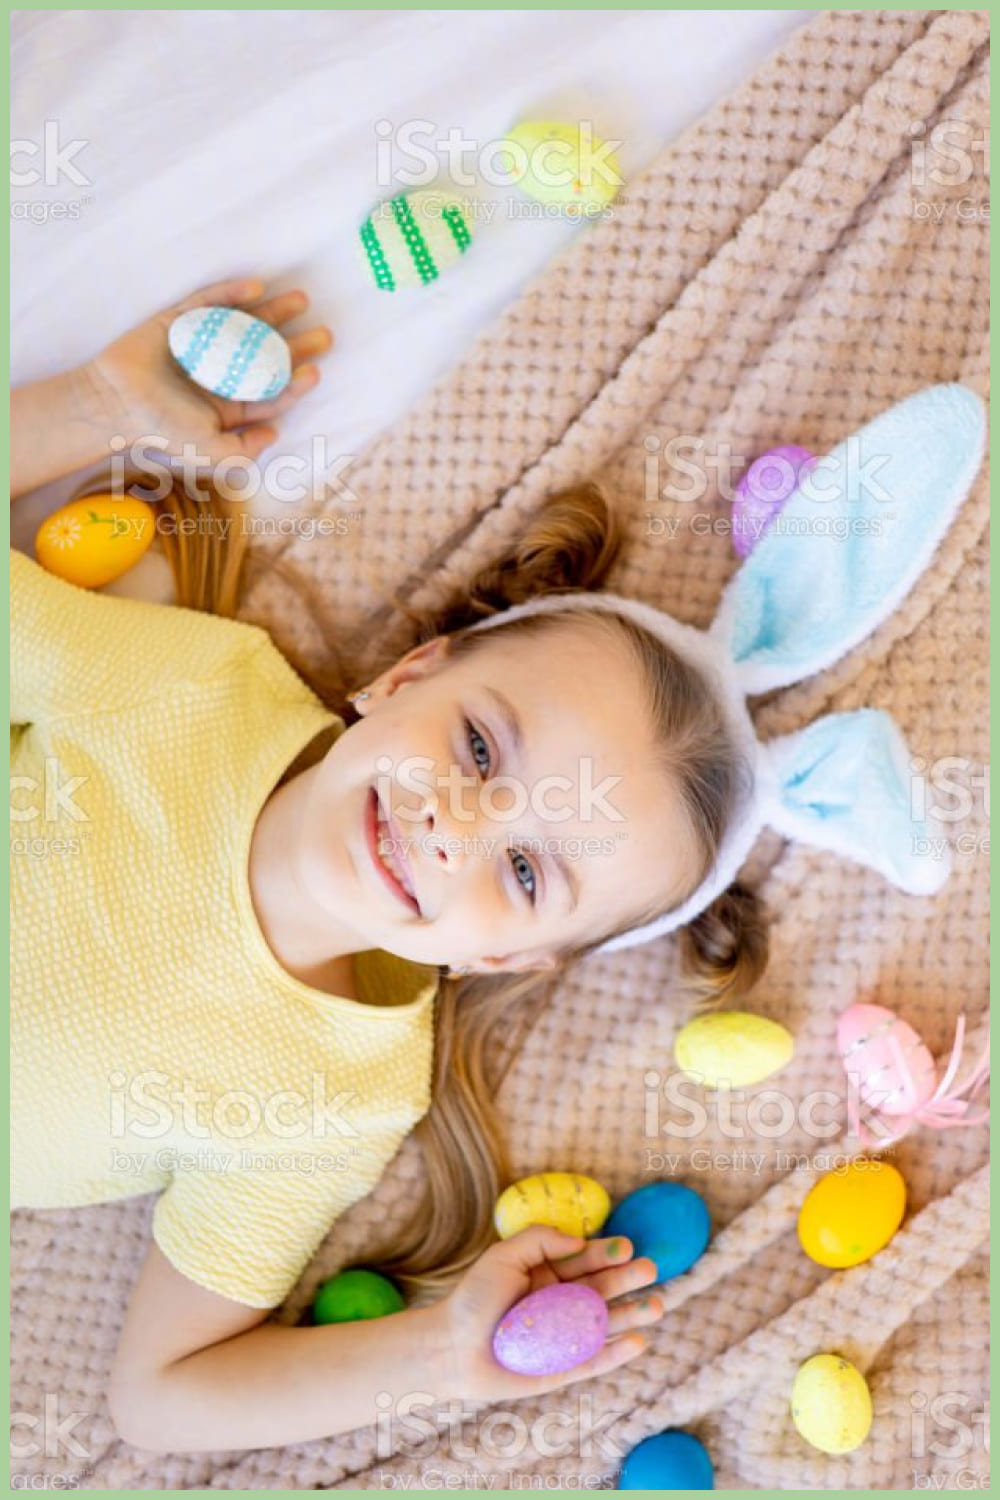 a little child girl among painted colored eggs is preparing for the holiday smiling and having fun.